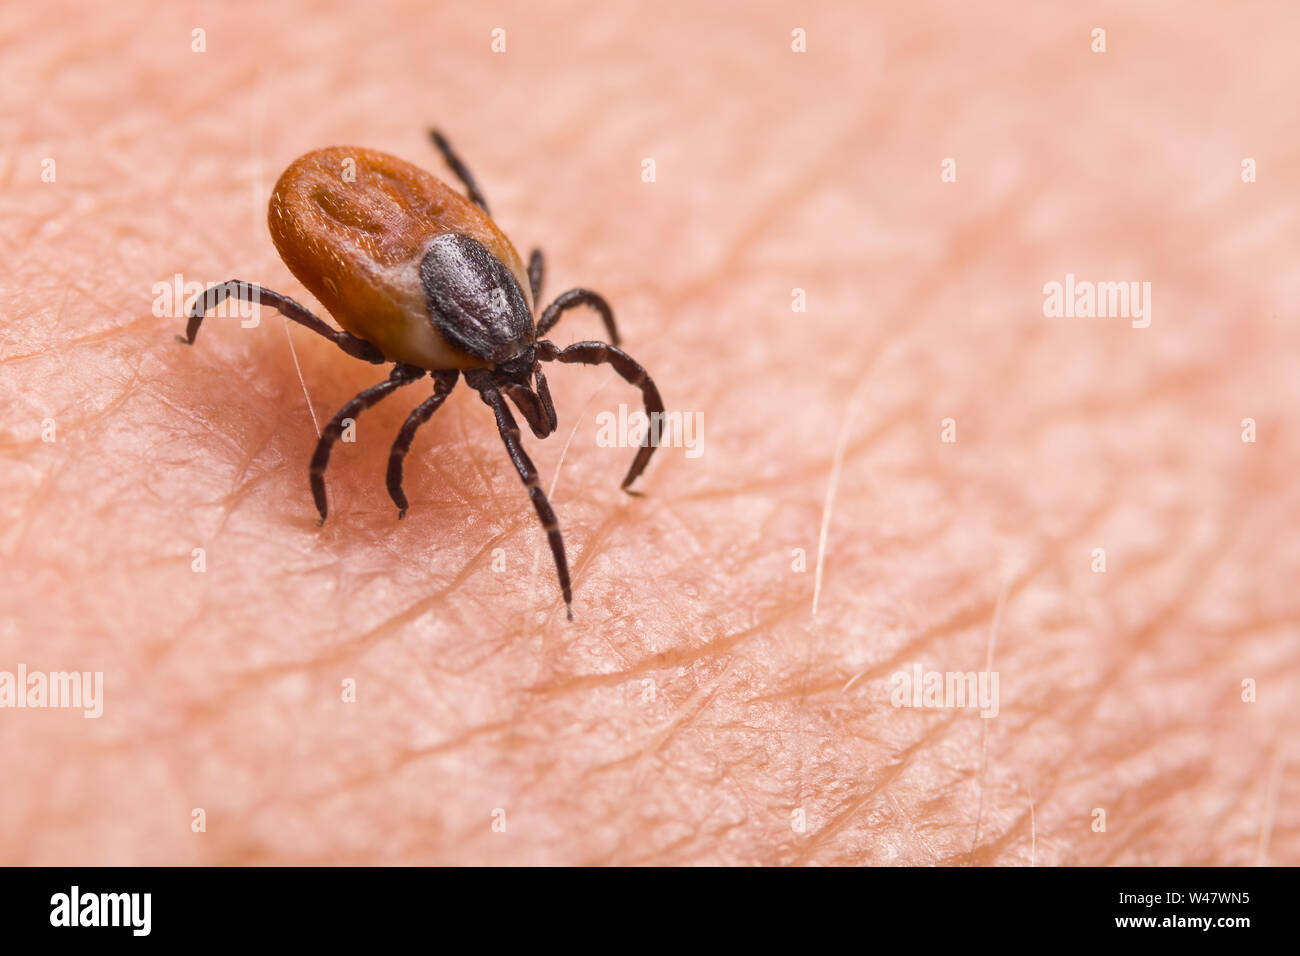 Infected female deer tick on hairy human skin. Ixodes ricinus. Parasitic mite. Acarus. Dangerous biting insect on background of pink epidermis detail. Stock Photo